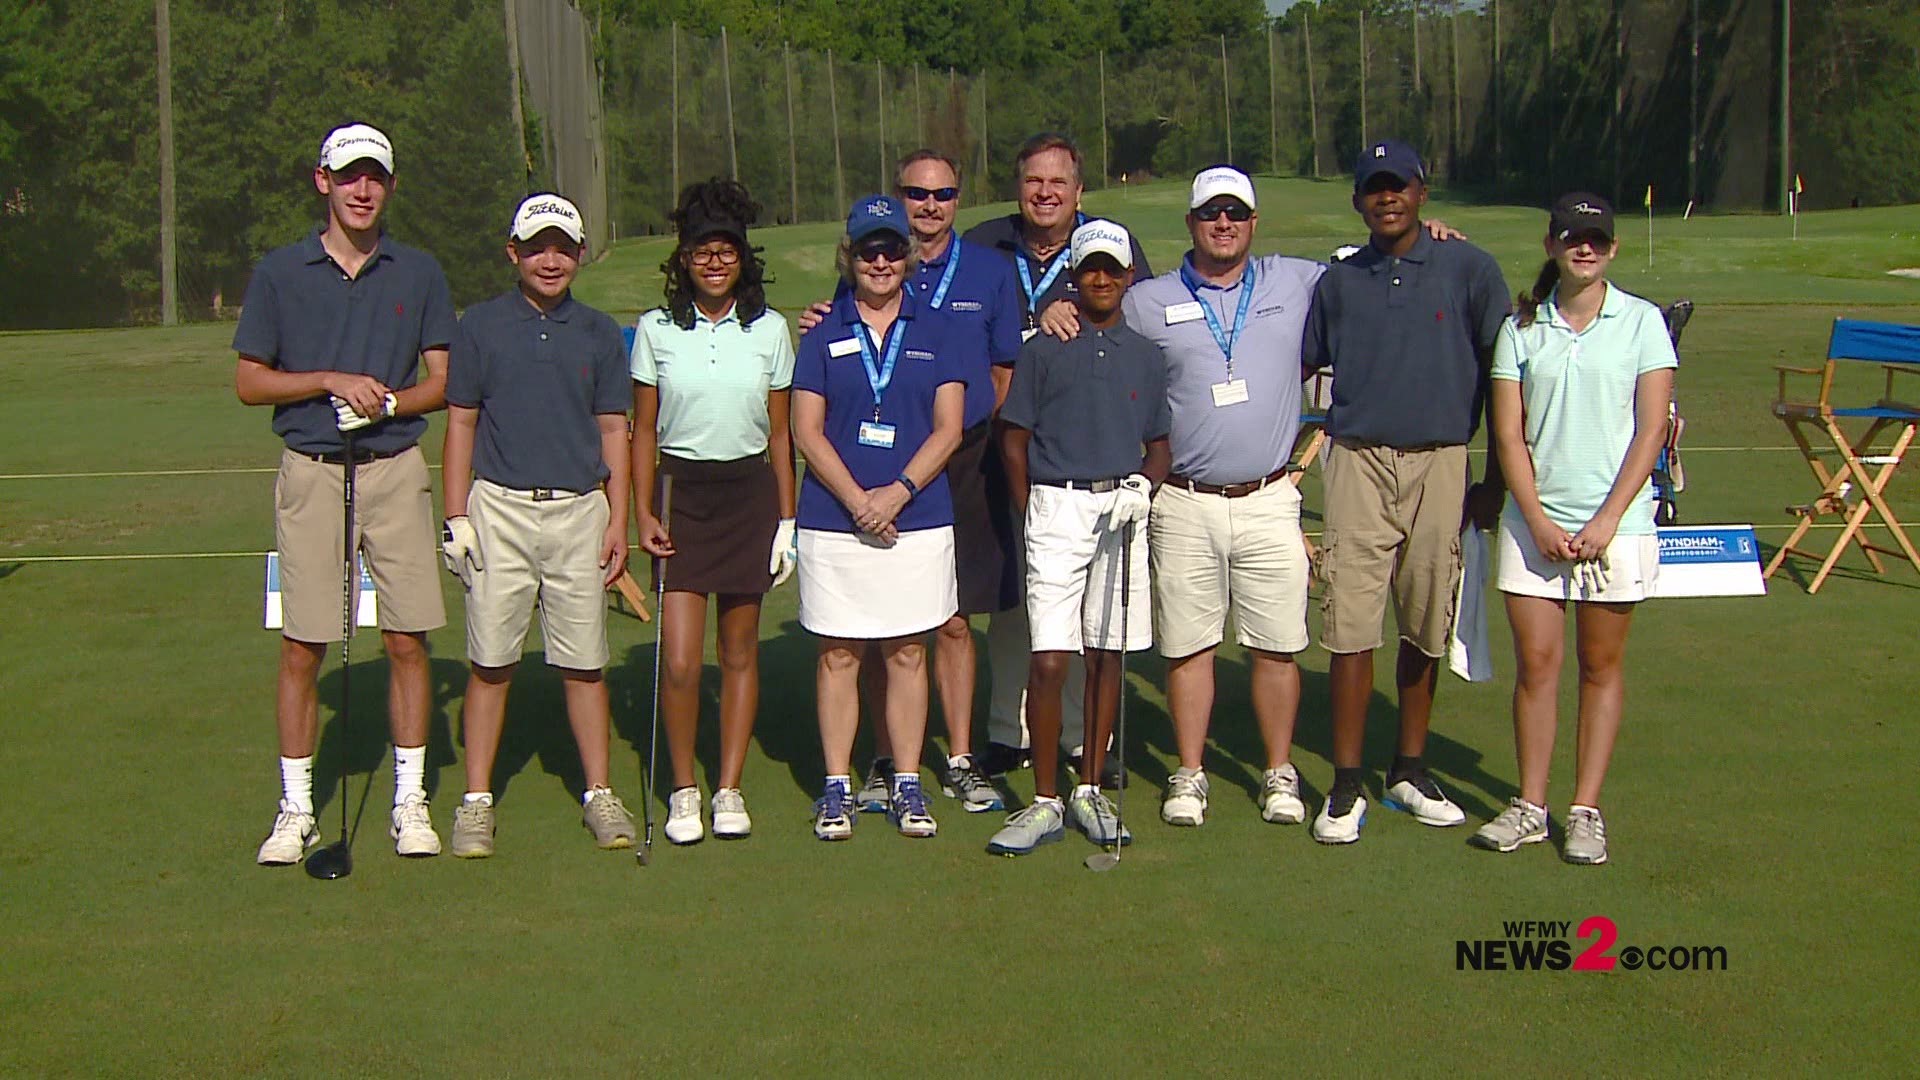 Twelve students affiliated with First Tee of the Triad competed in the 2018 Kevin Harvick Foundation Pro-Am, which leads up to the 2018 Wyndham Championship at Sedgefield Country Club.